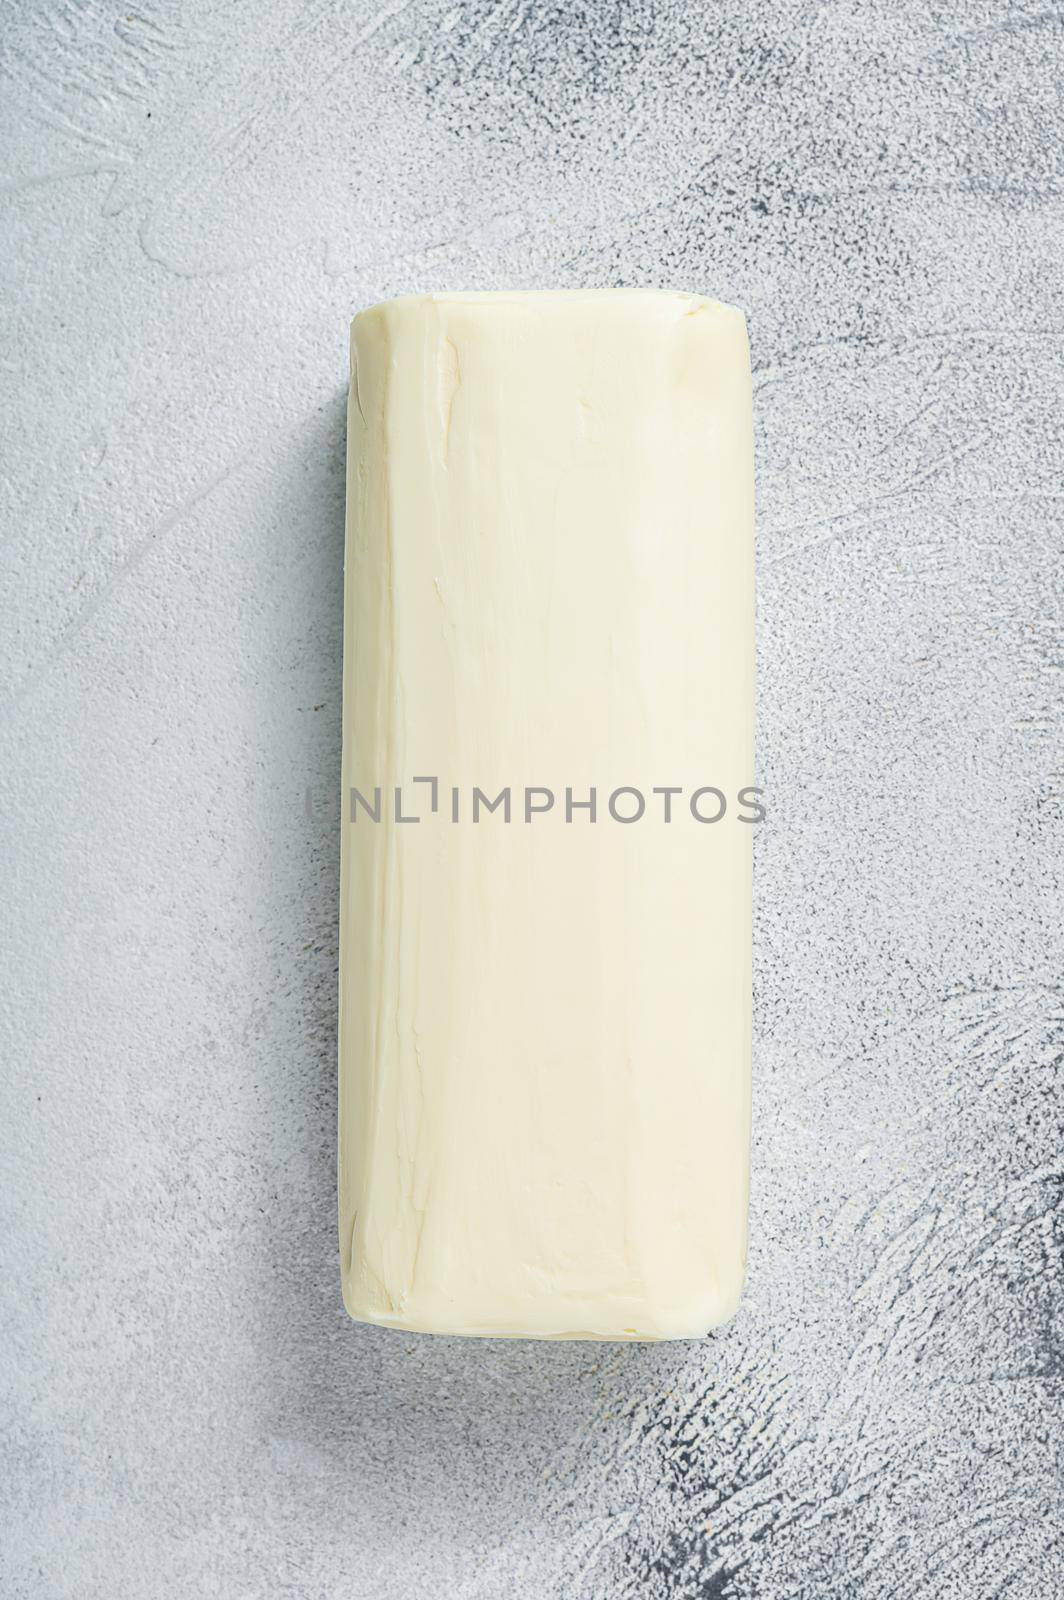 Piece of fresh butter for breakfast on kitchen table. White background. Top view.